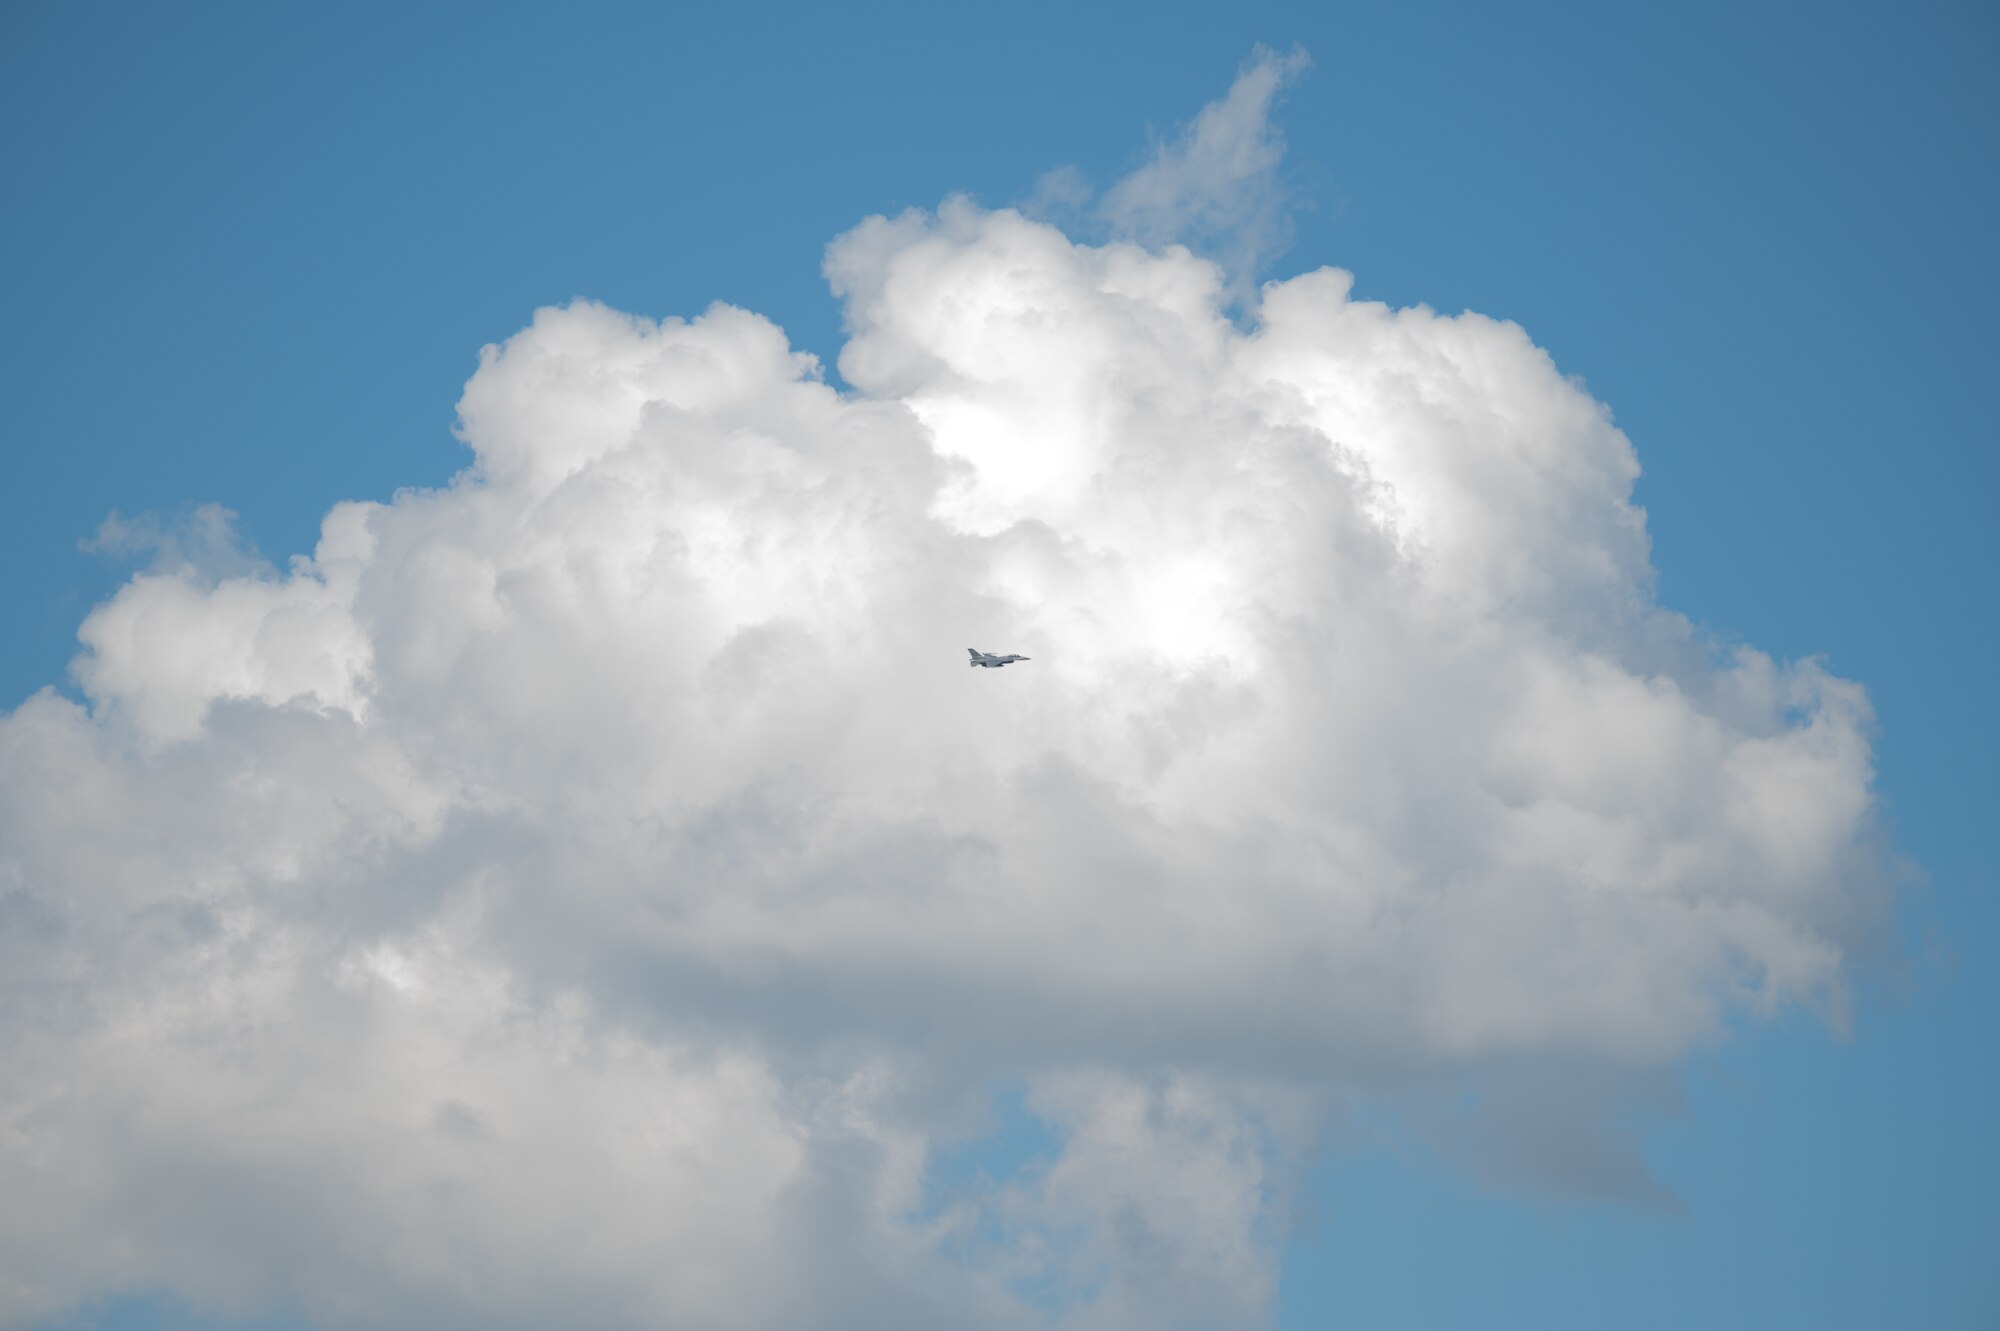 A fighter jet soars through fluffy white clouds.